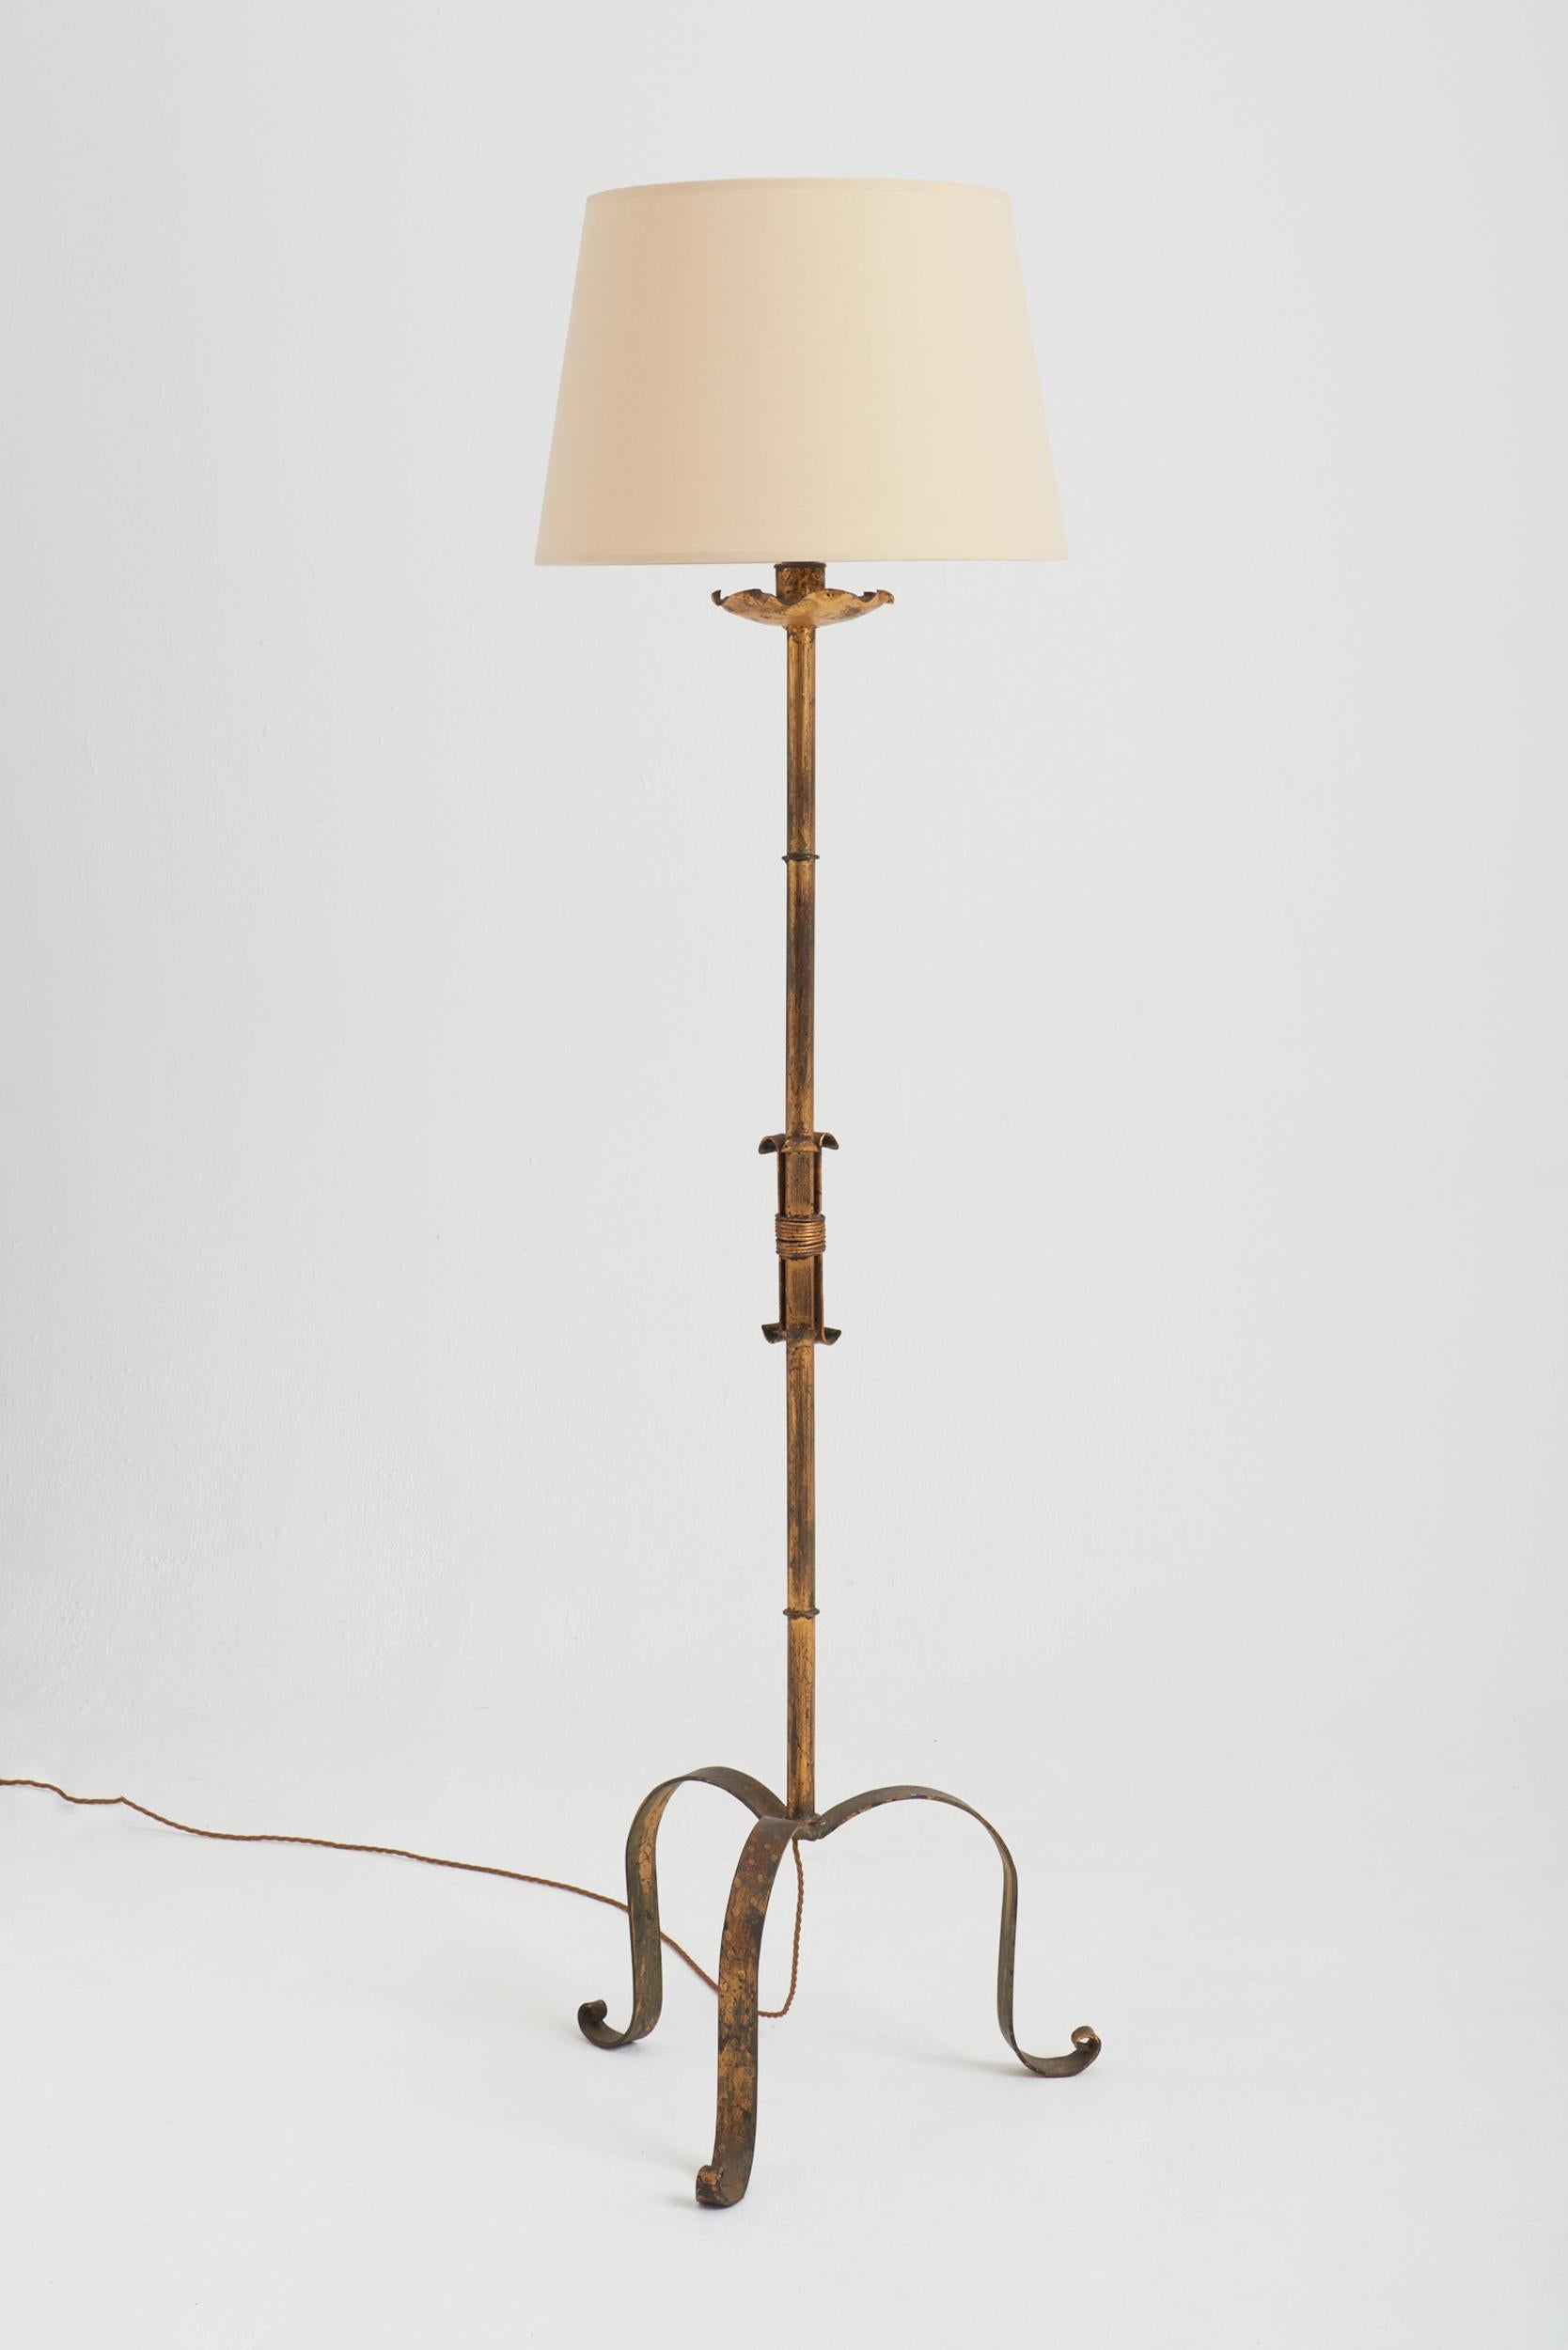 A gilt forged iron floor lamp.
Spain, third quarter of the 20th century.
Measures: With the shade: 167 cm high by 46 cm diameter. 
Lamp base only: 143 cm high by 50 cm diameter.